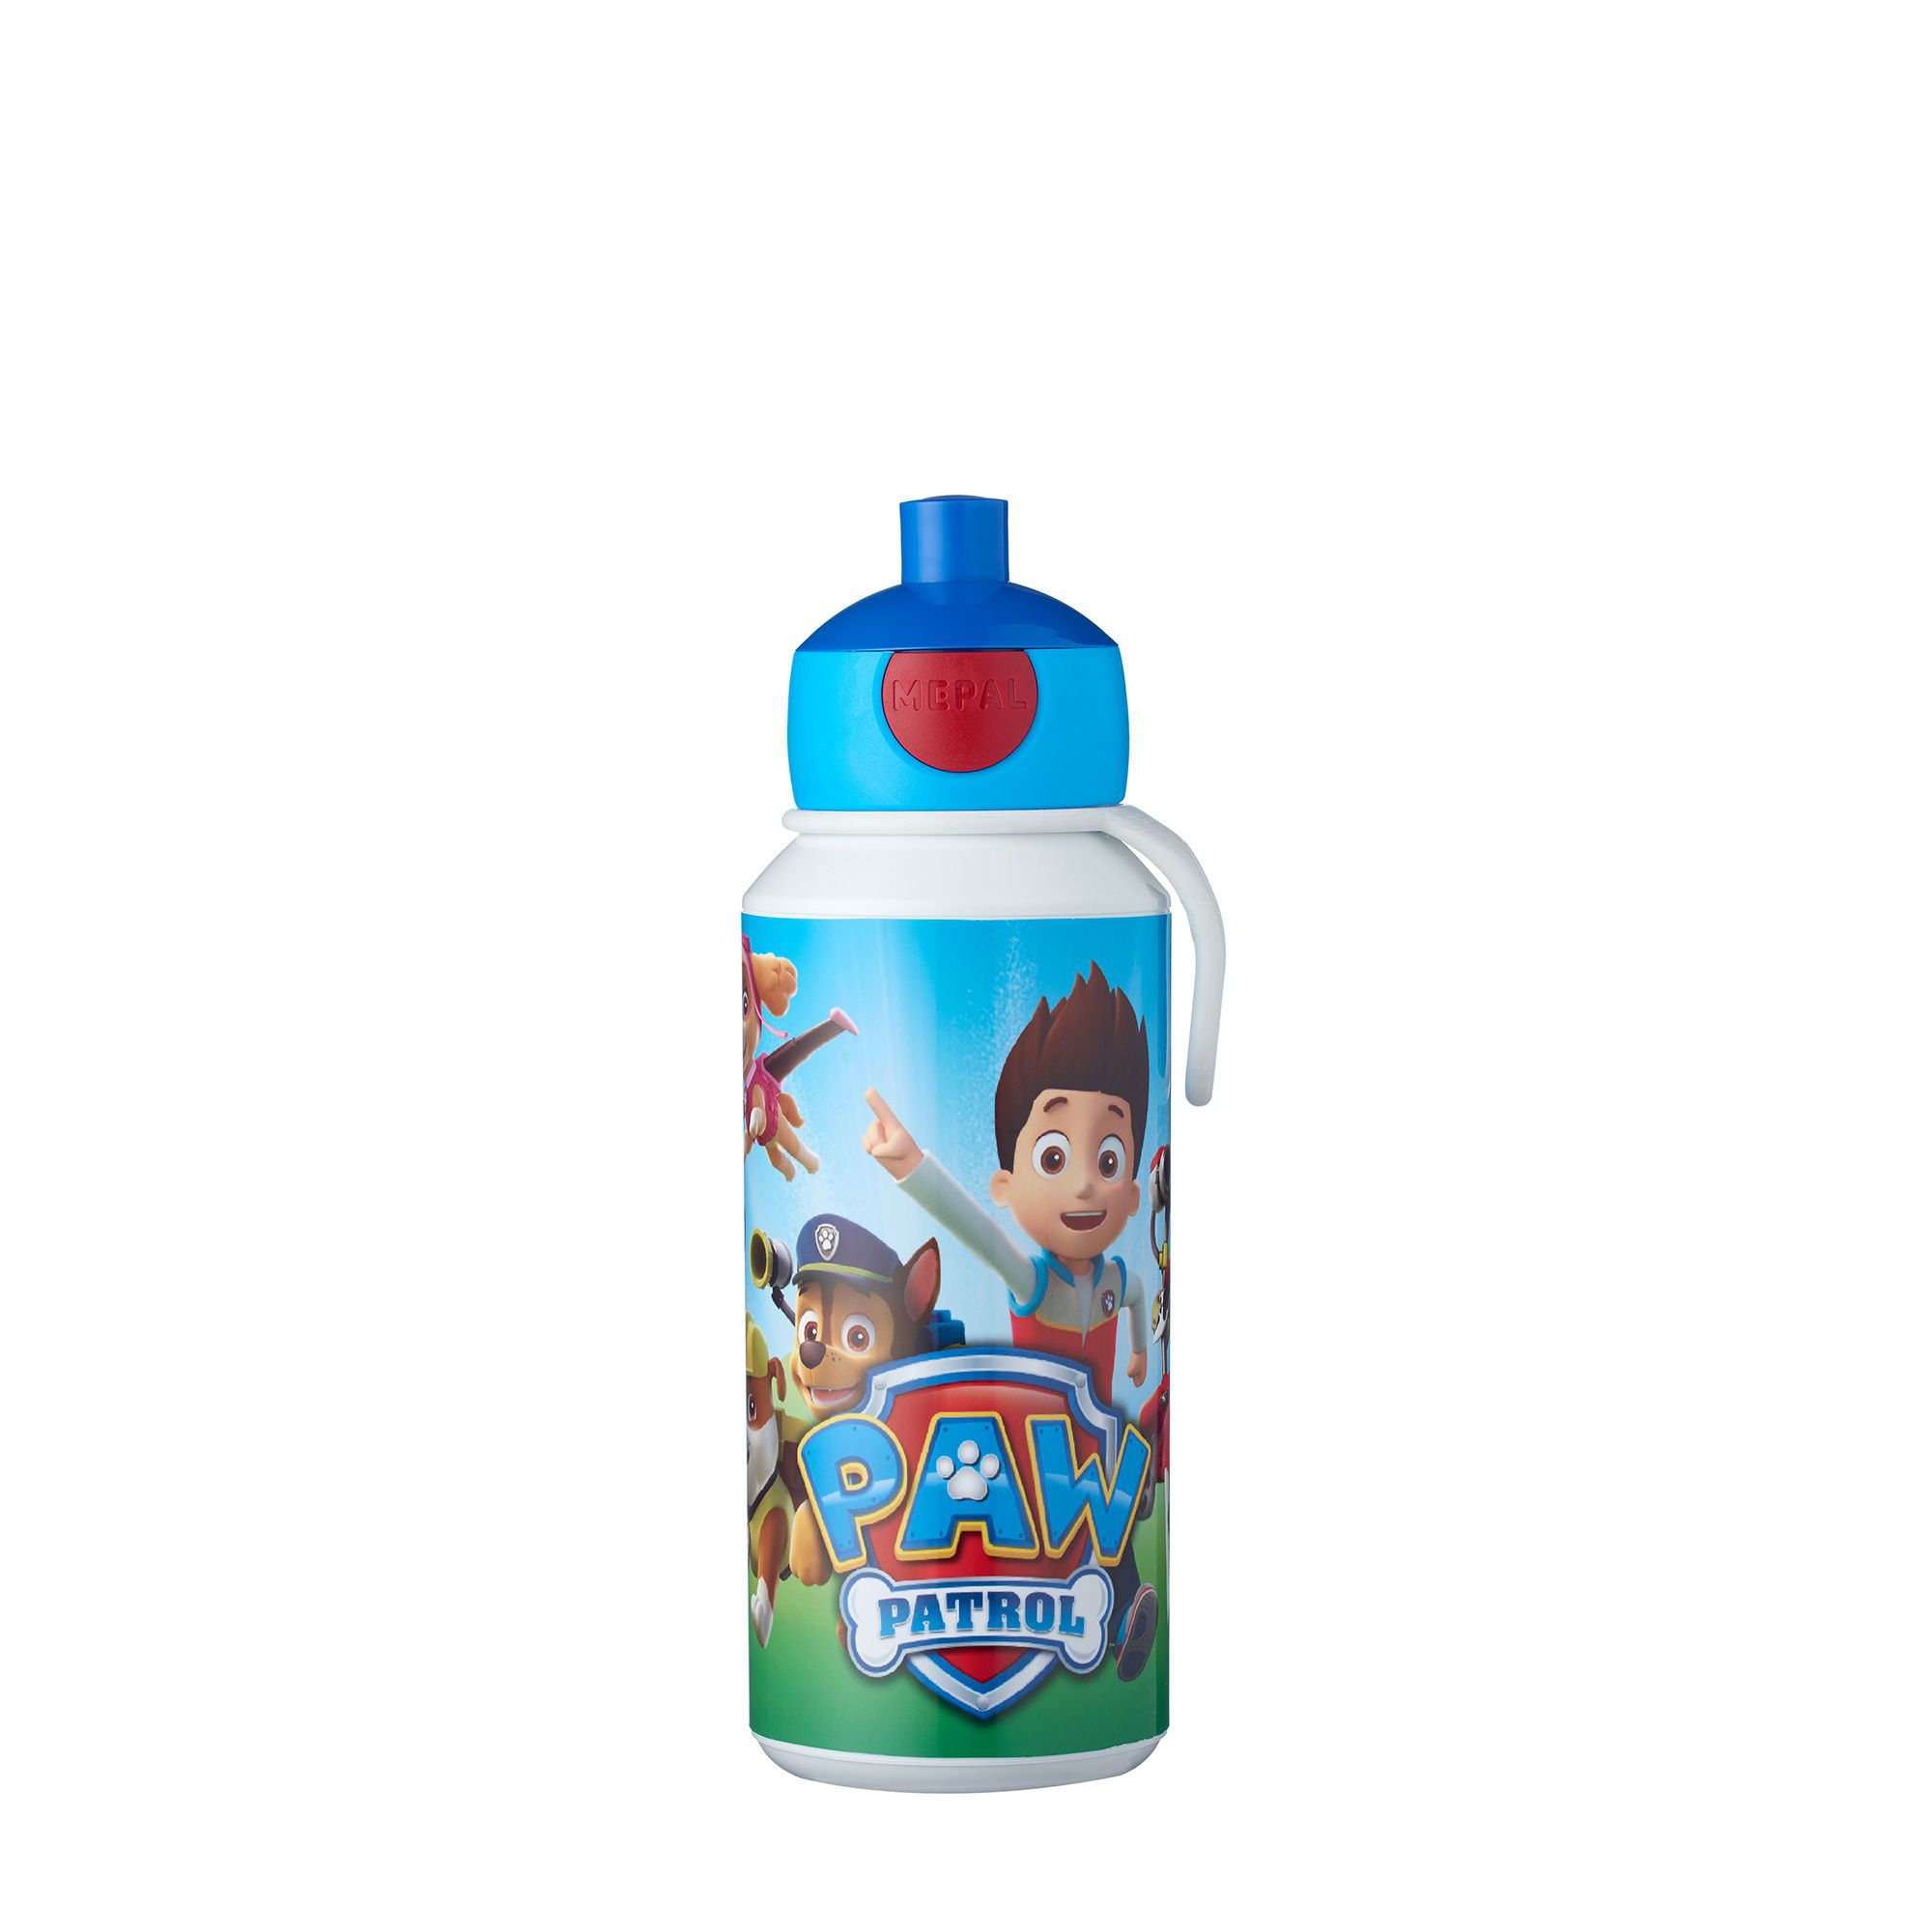 Mepal - Campus N Paw Patrol - different products